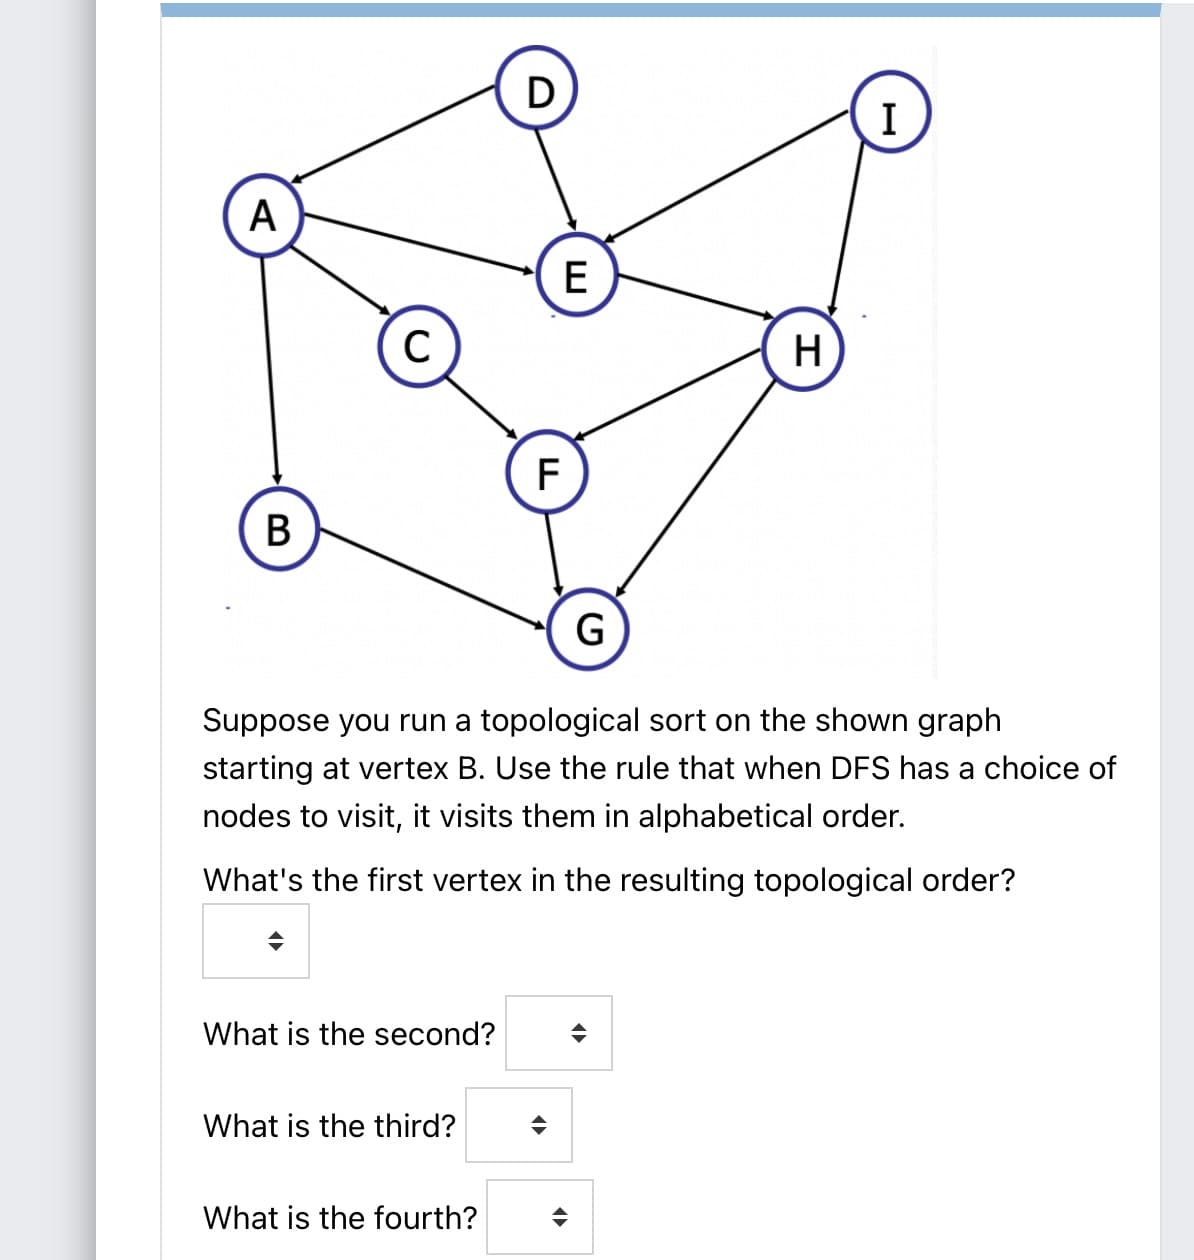 I
A
E
H
F
В
G
Suppose you run a topological sort on the shown graph
starting at vertex B. Use the rule that when DFS has a choice of
nodes to visit, it visits them in alphabetical order.
What's the first vertex in the resulting topological order?
What is the second?
What is the third?
What is the fourth?
